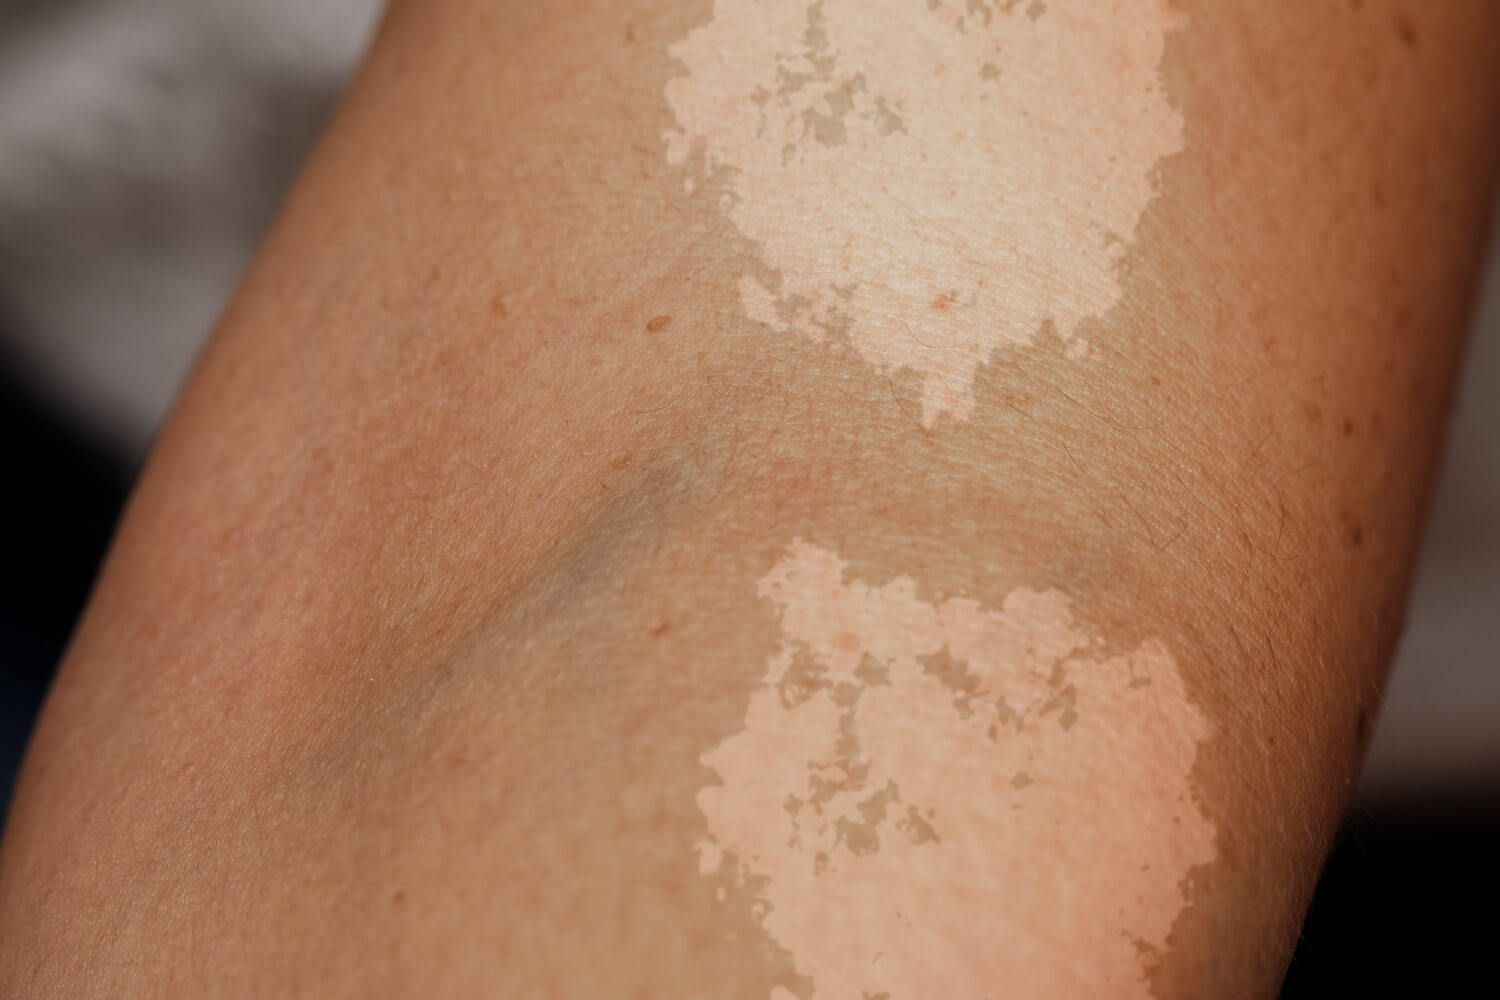 Tinea versicolor is a fungal infection that presents as a white, discolored patch of skin.